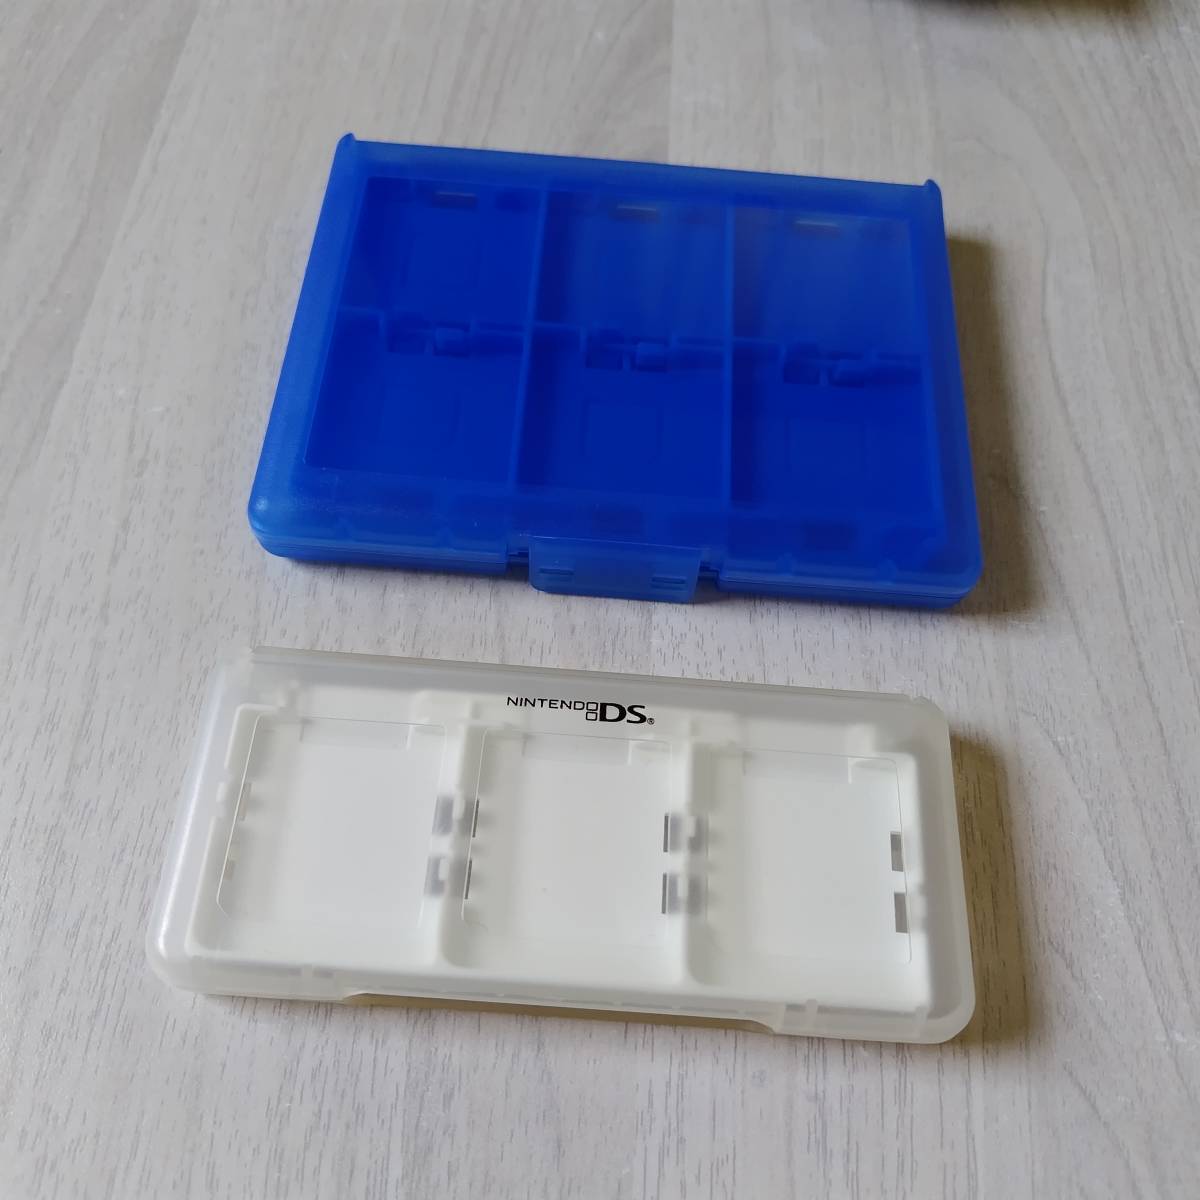 0 card-case 24 for Nintendo 3DS blue DS card-case what pcs . including in a package possible 0